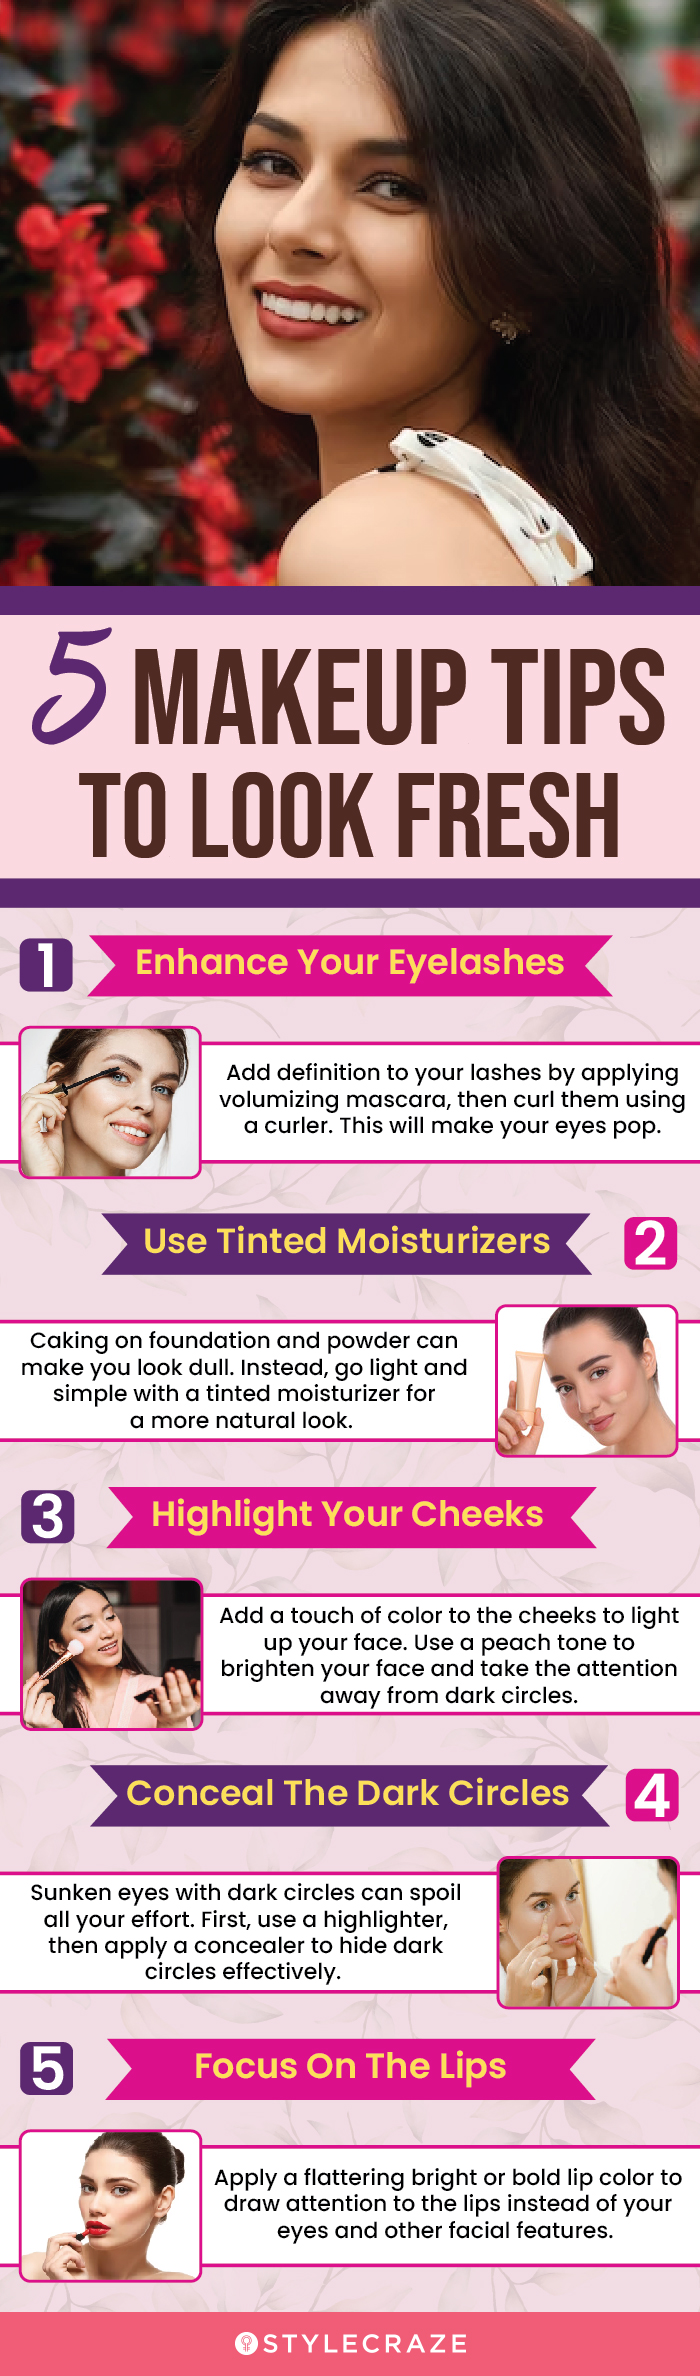 5 makeup tips to look fresh (infographic)